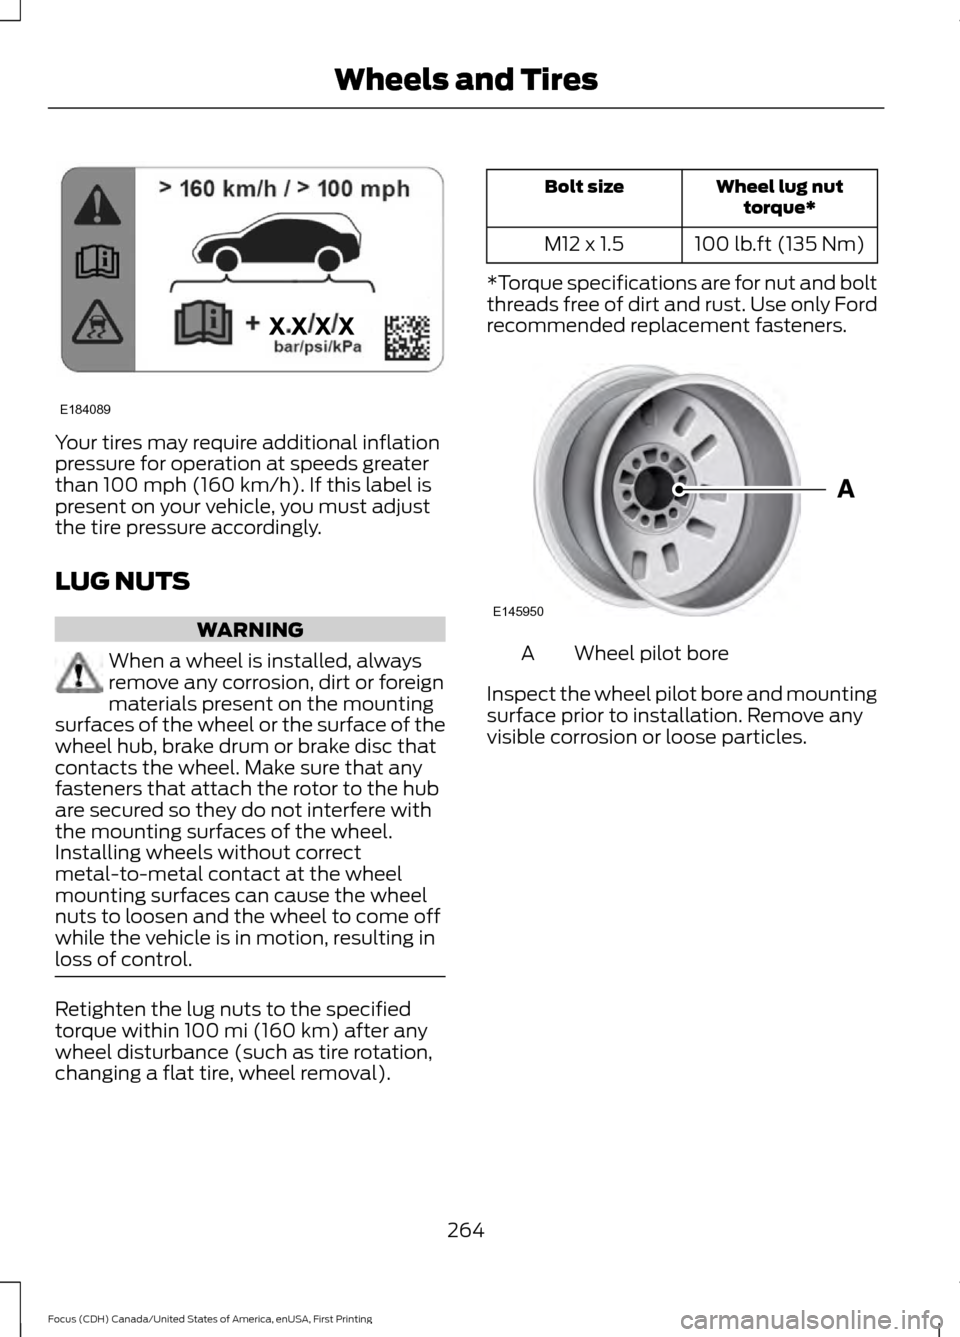 FORD FOCUS 2016 3.G Owners Manual Your tires may require additional inflation
pressure for operation at speeds greater
than 100 mph (160 km/h). If this label is
present on your vehicle, you must adjust
the tire pressure accordingly.
L